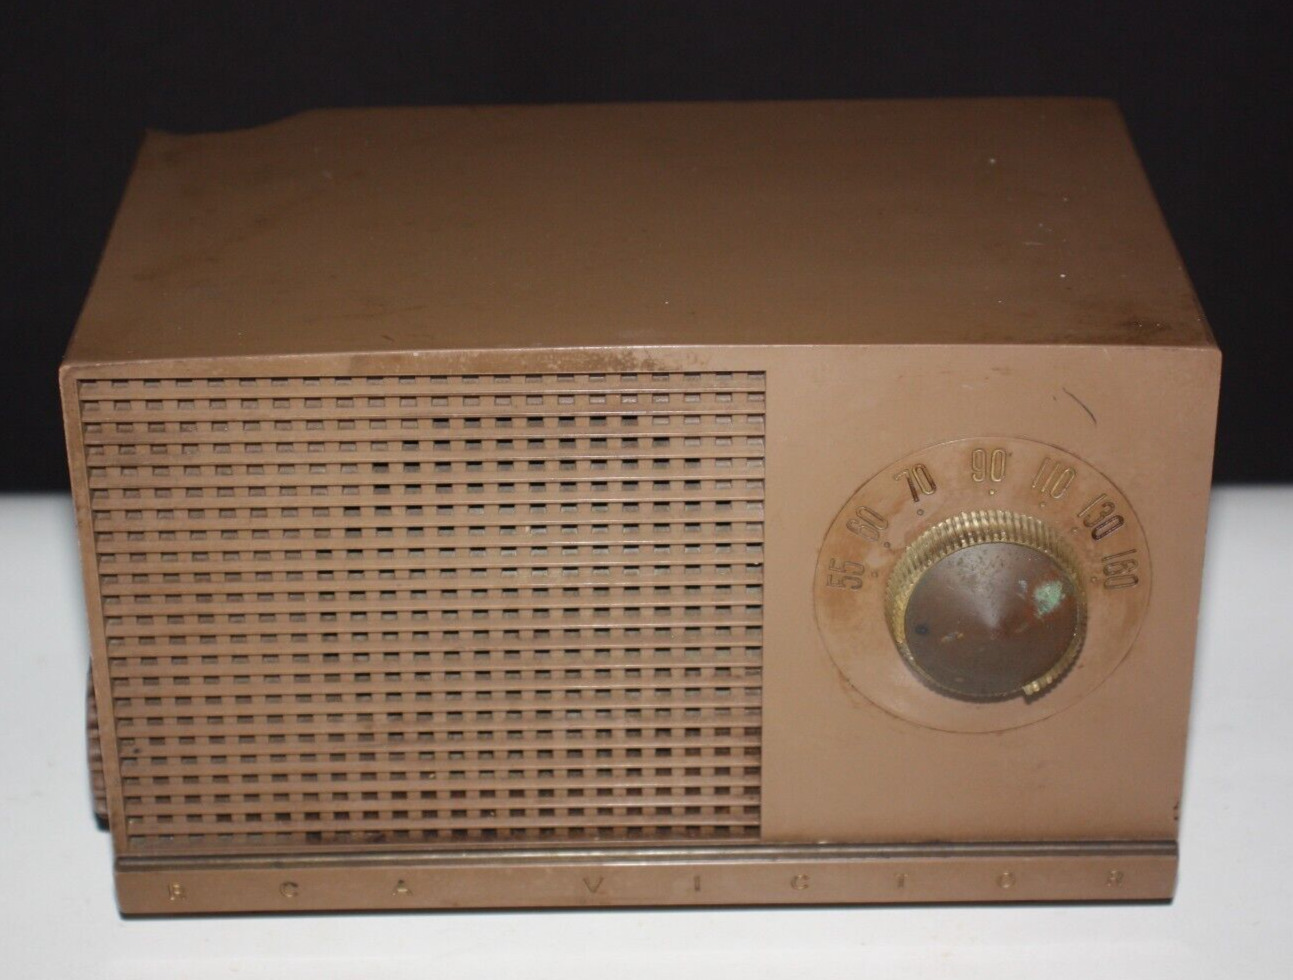 RCA Victor Model 3X534 Tube Radio Brown Tabletop 1950s Mid Century Non-Working